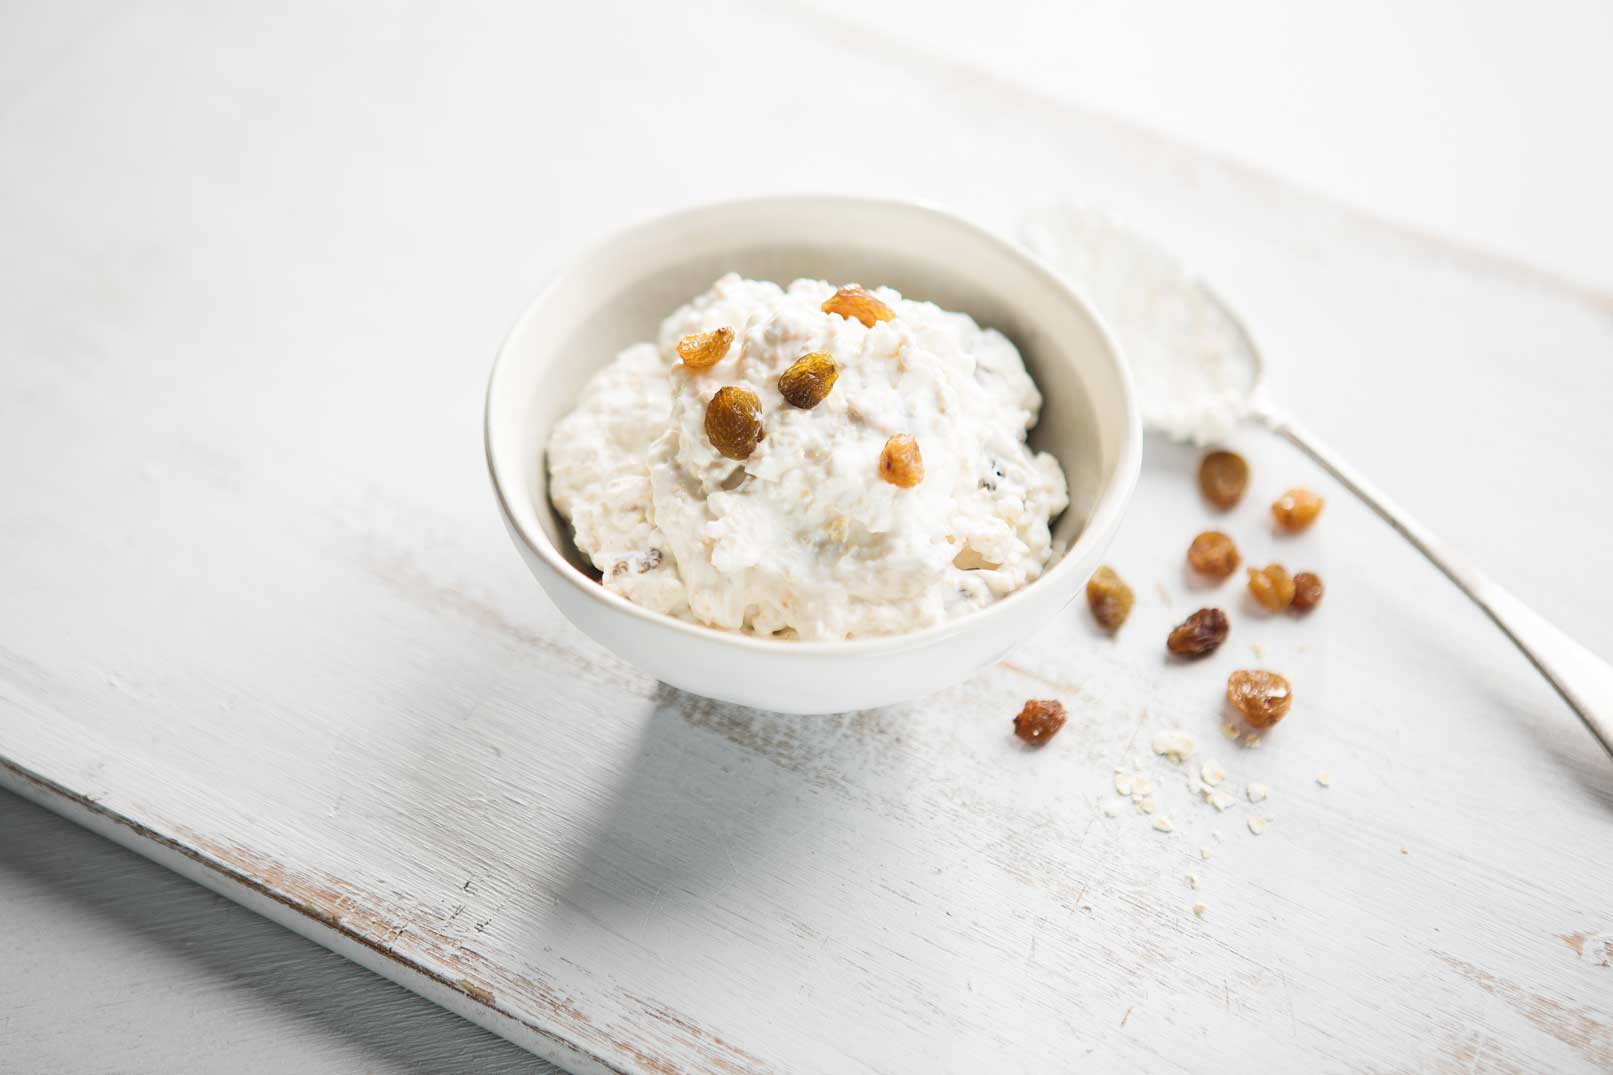 Mixed yoghurt and oats in a small white bowl topped with sultanas and a serving spoon on the side